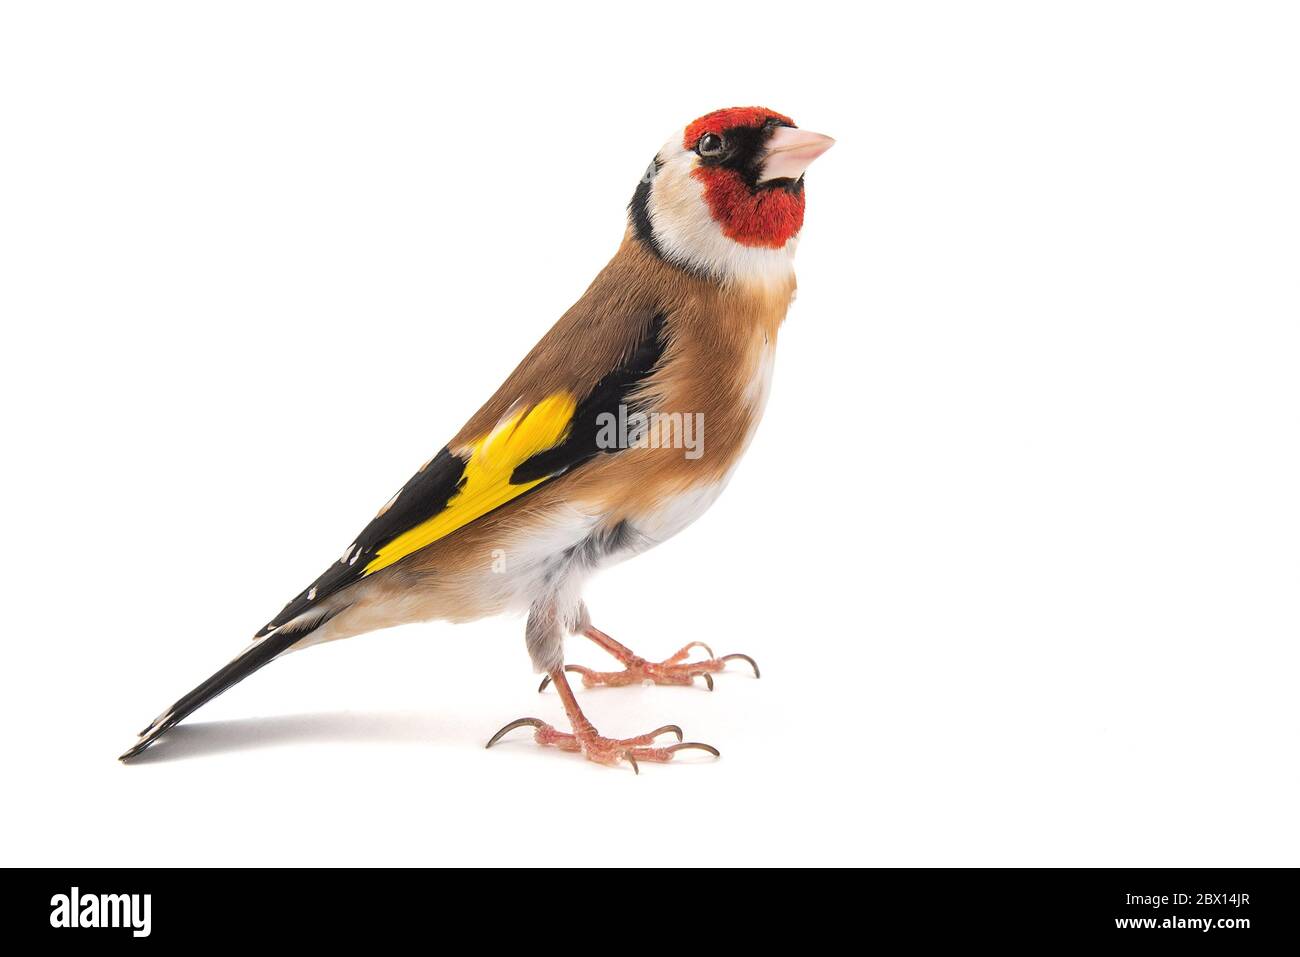 European Goldfinch, carduelis carduelis, standing isolated on white background Stock Photo